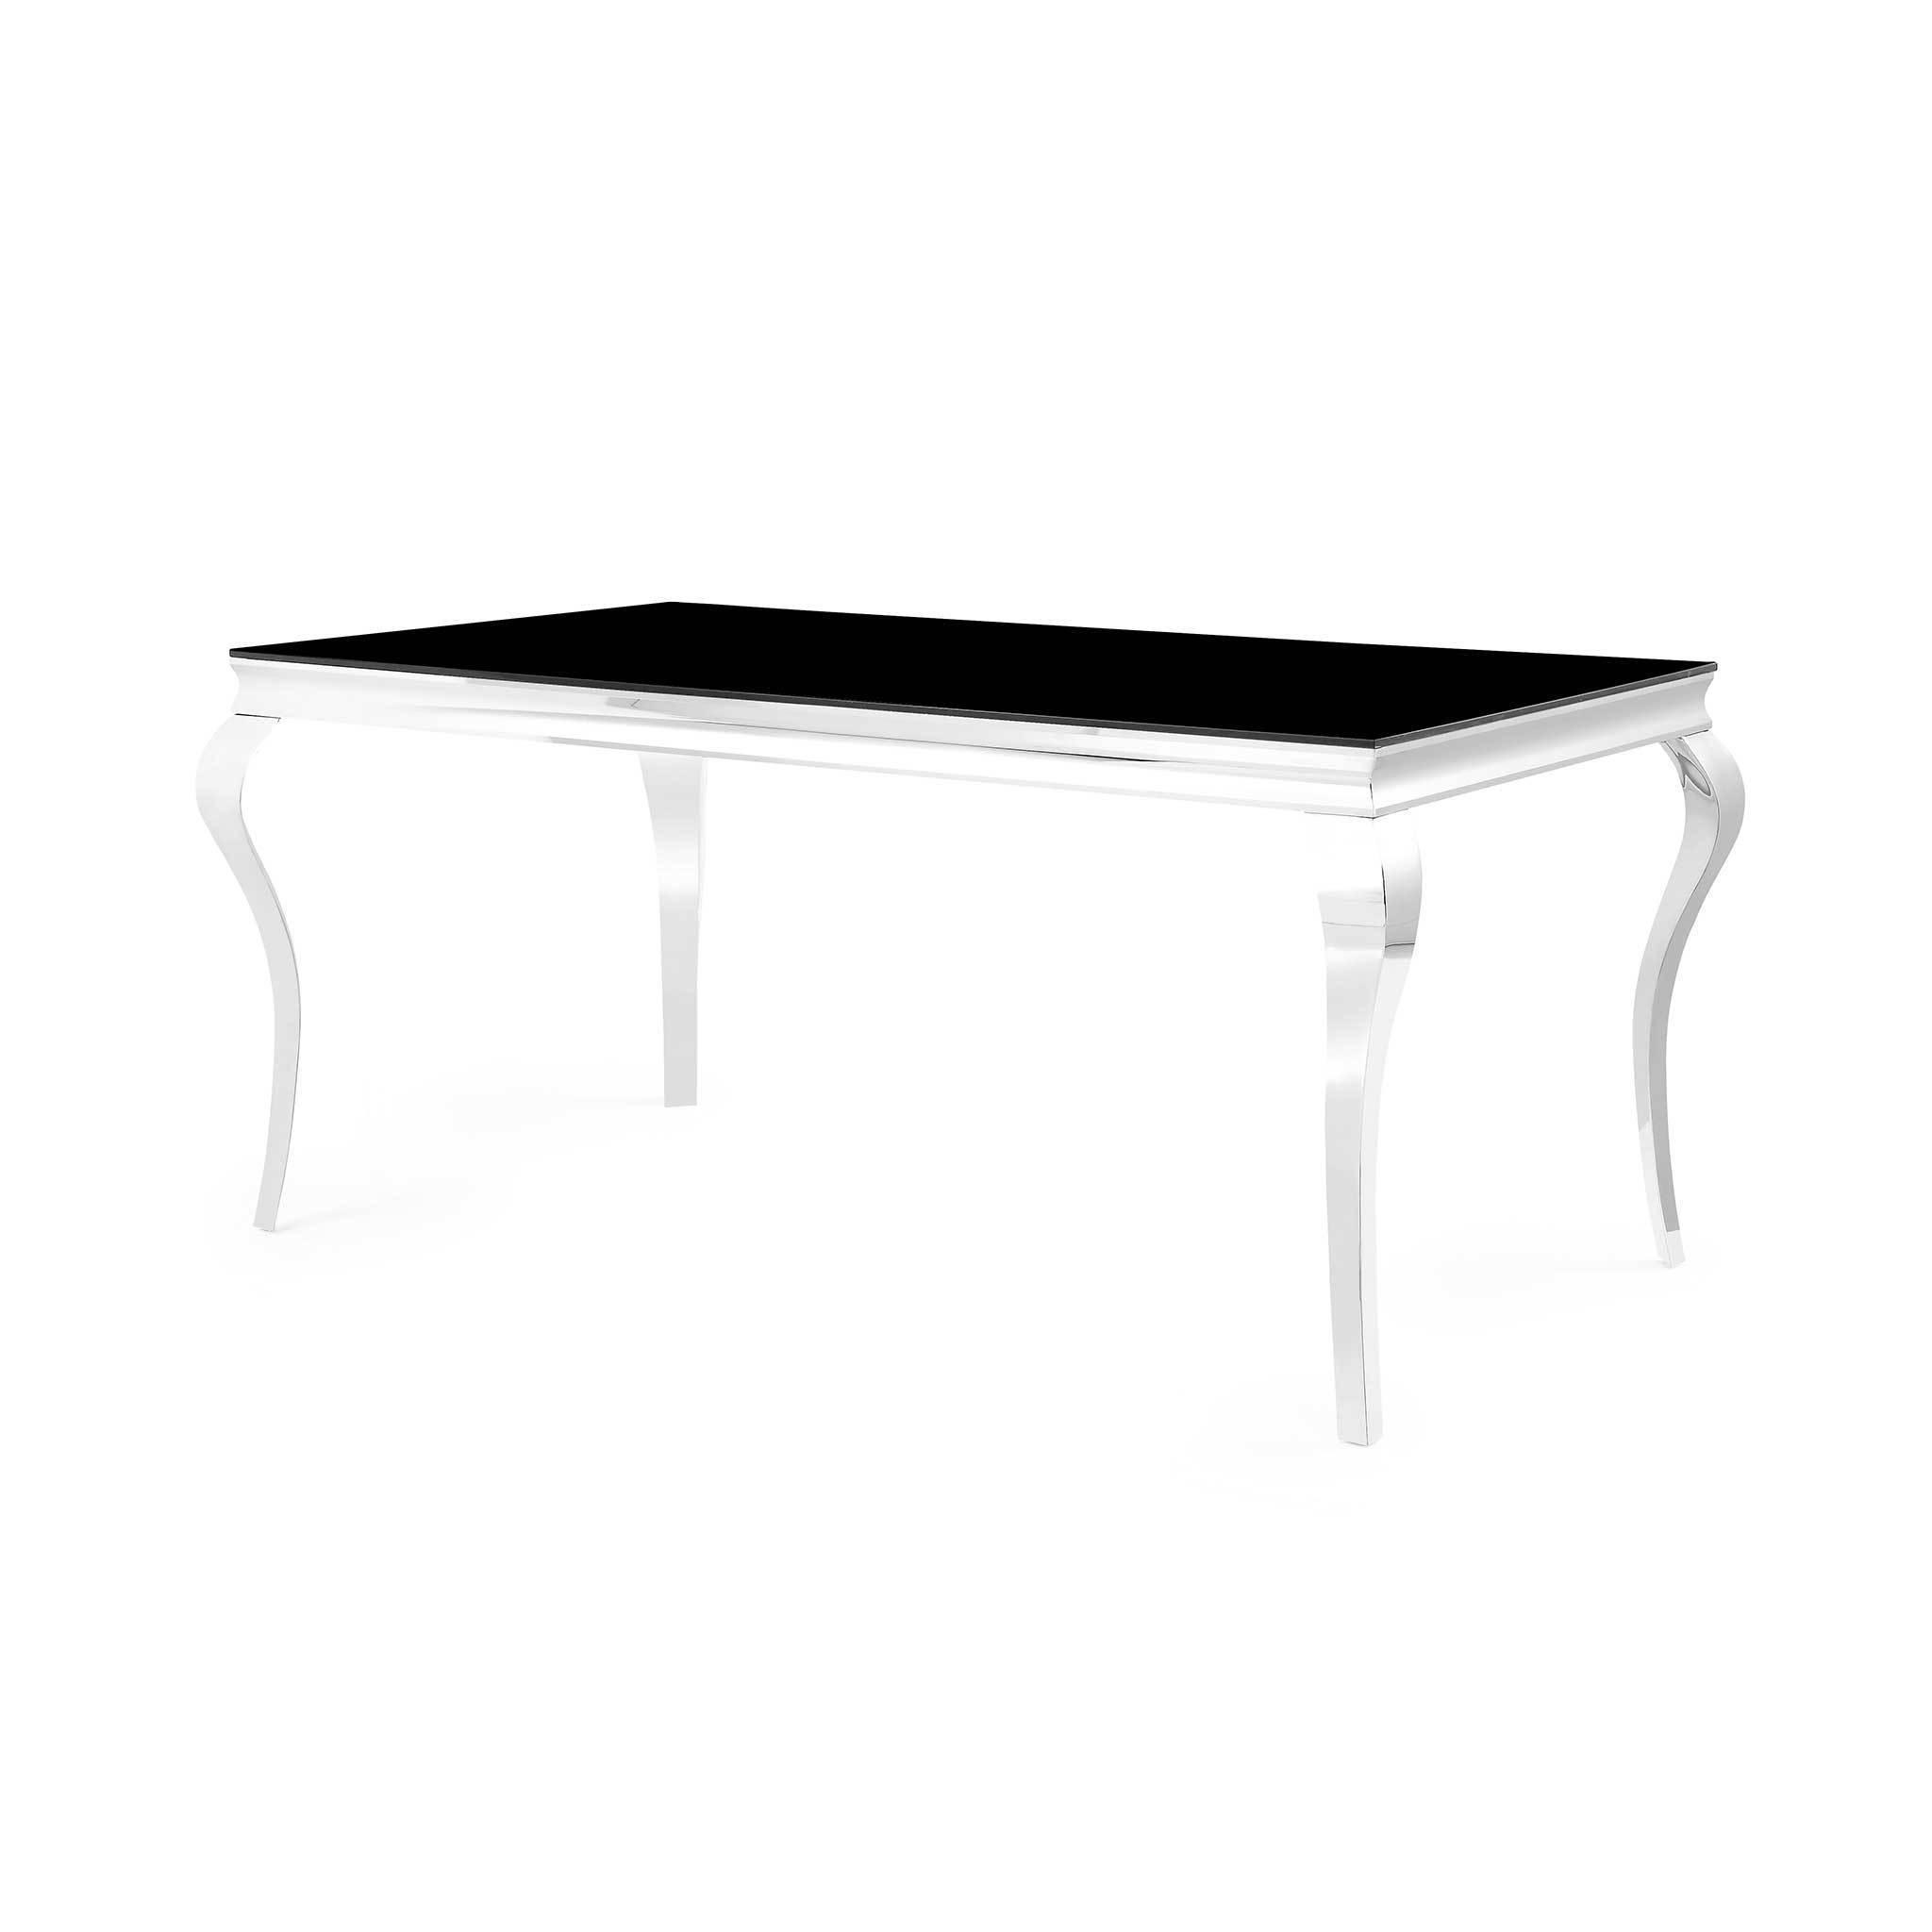 Contemporary, Classic Dining Table D858DT D858-DT in Metal, Black 